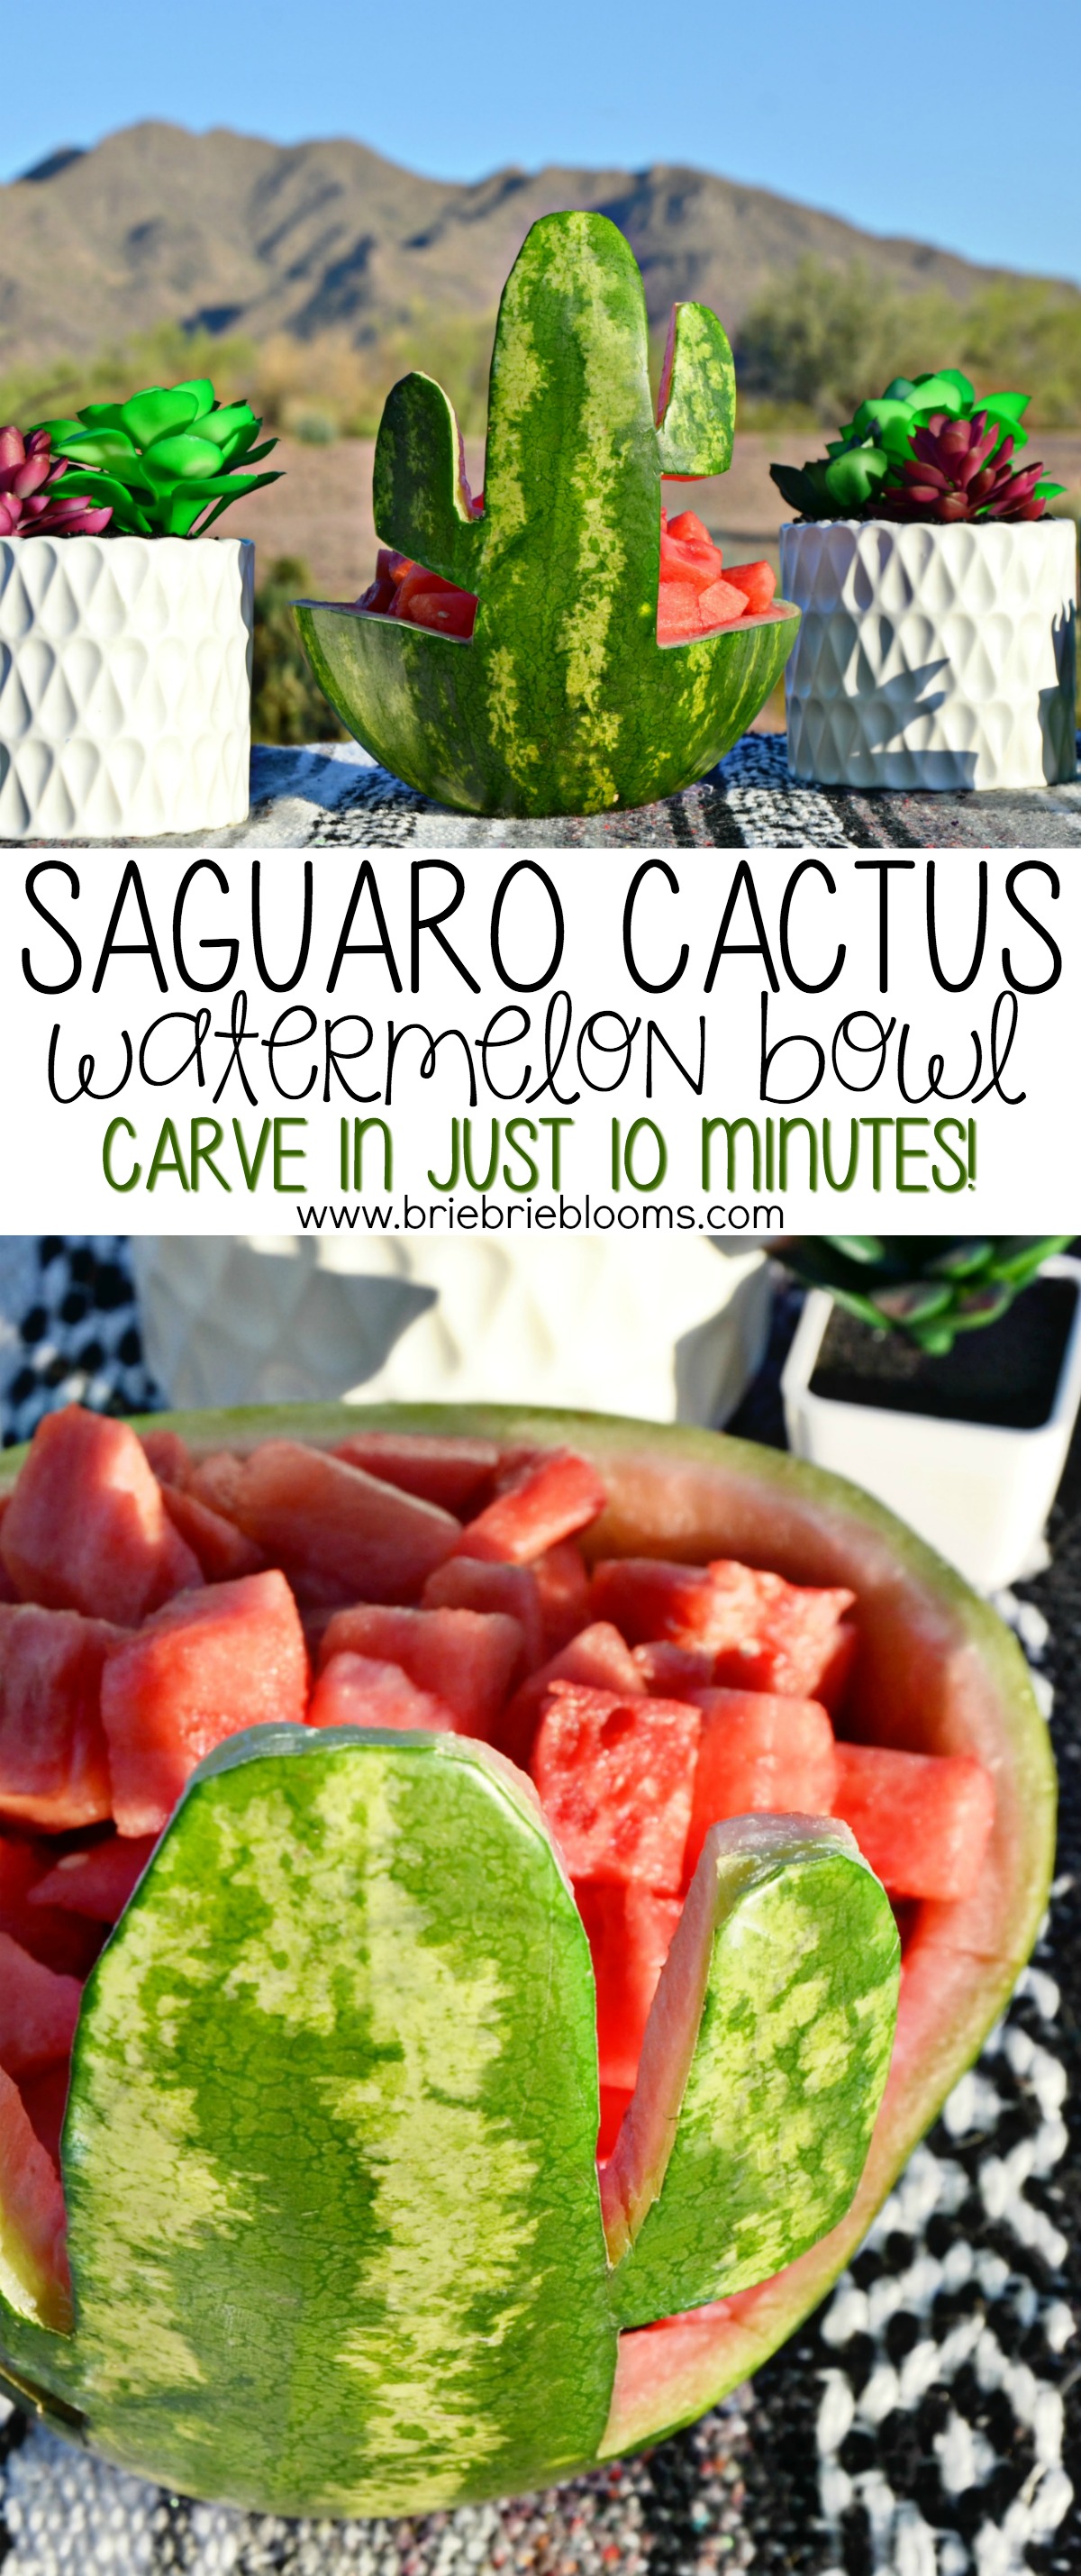 This simple saguaro cactus watermelon bowl can be carved in just 10 minutes!